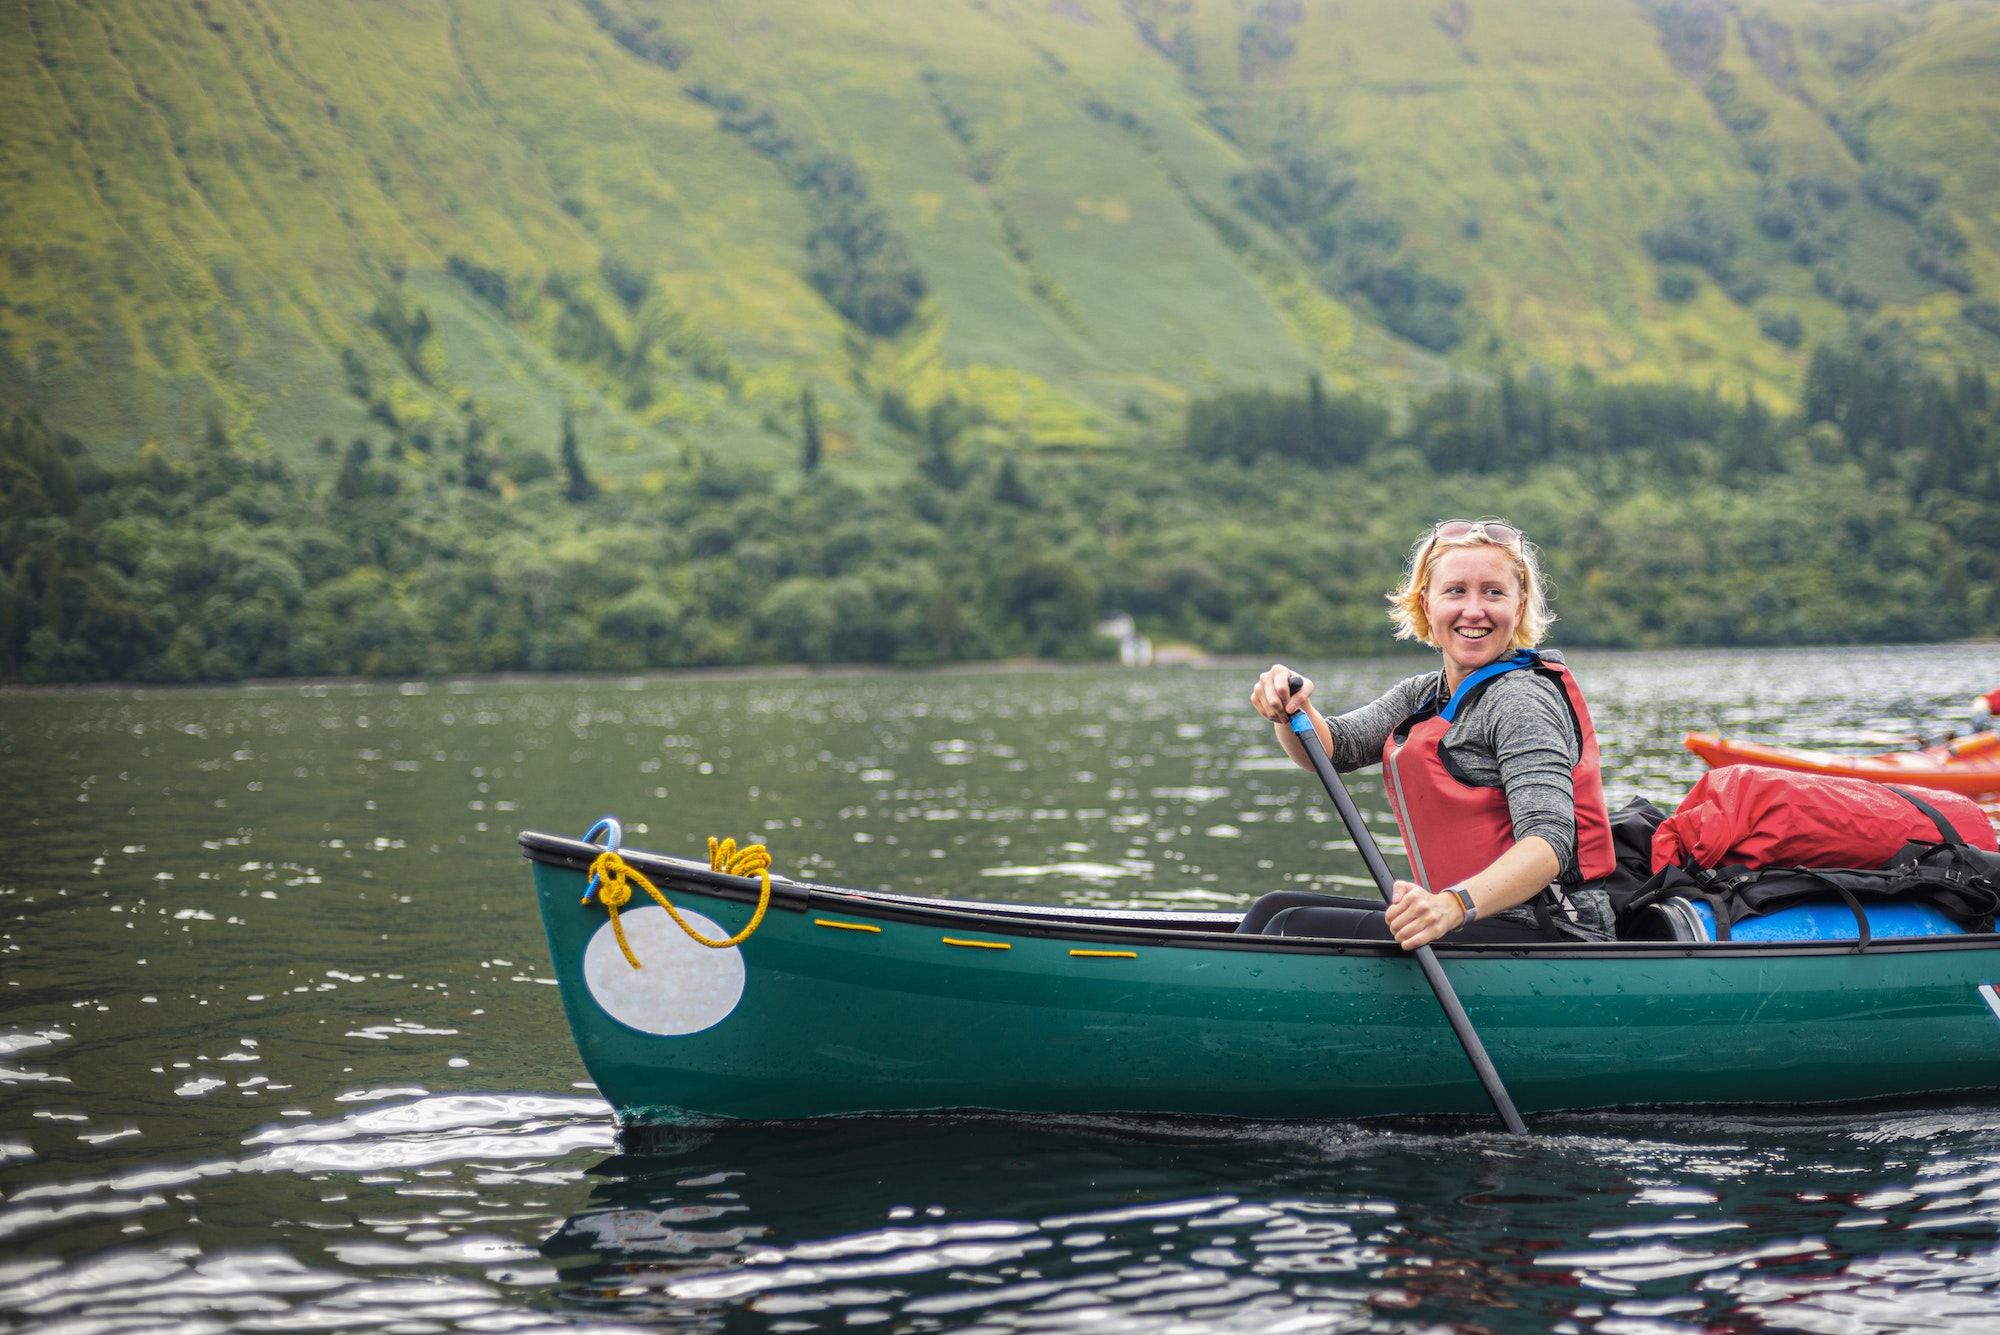 Canoeing Loch Lochy, part of the Caledonian Canal, Fort William, Scottish Highlands, Scotland, Unite